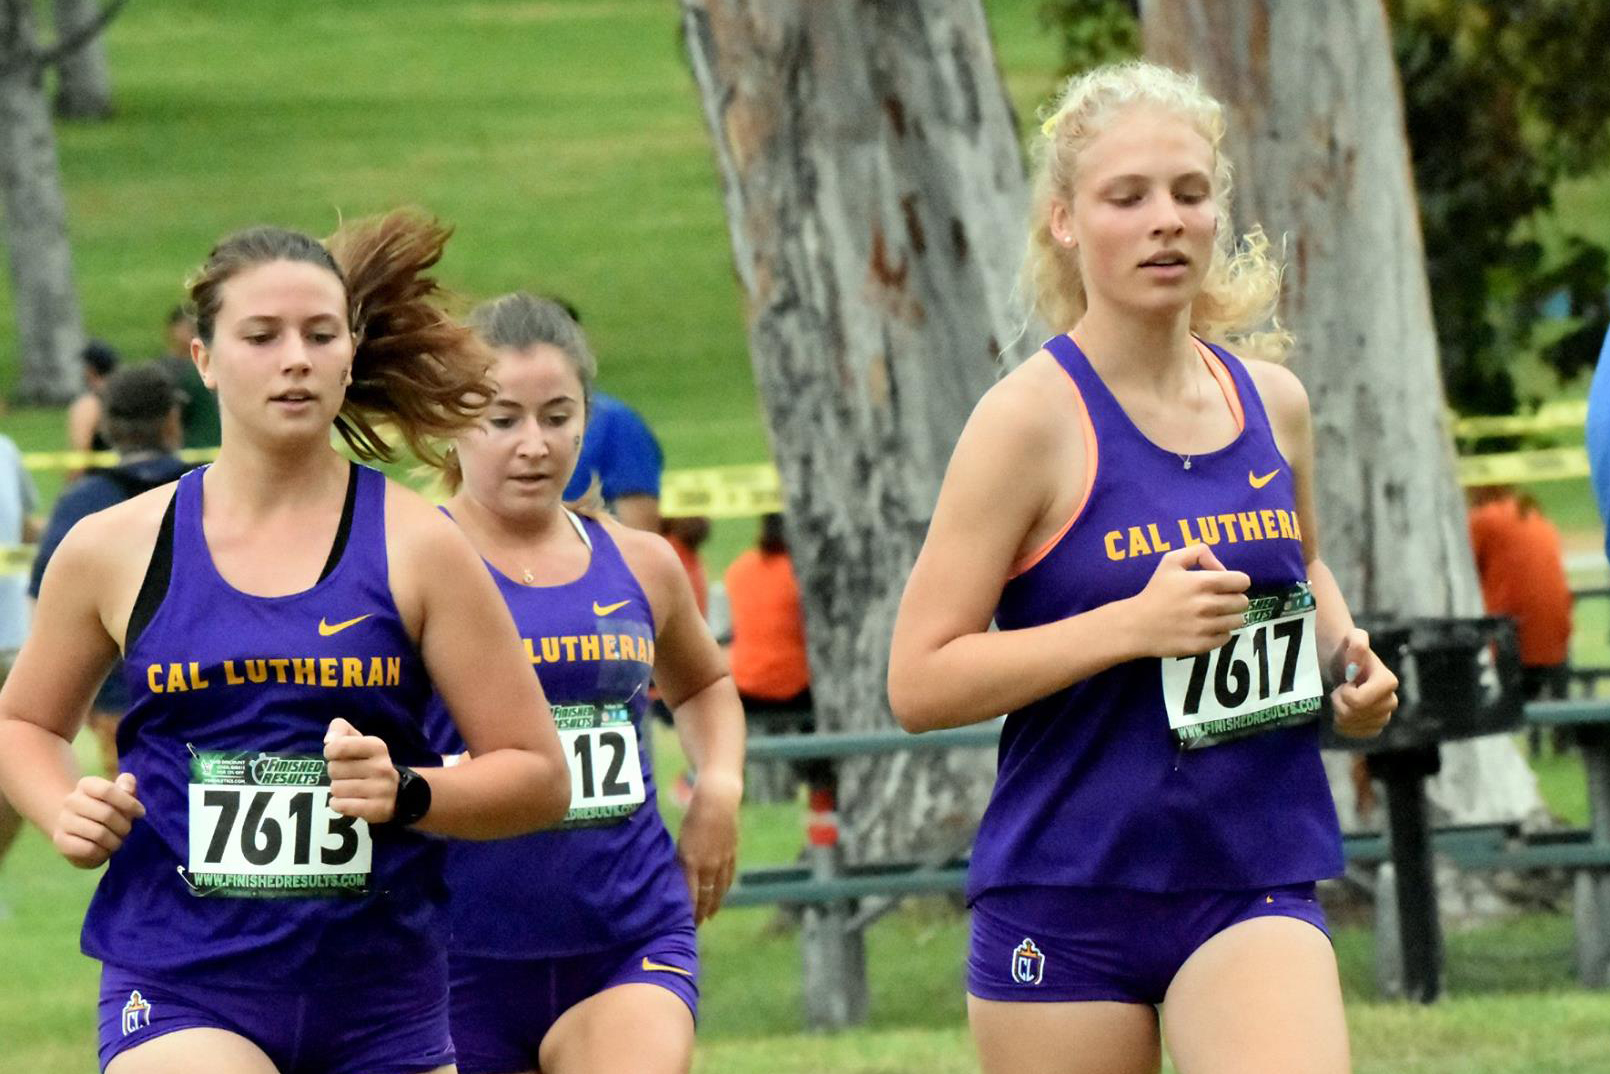 Redpath Leads Regals in 6K Debut at UC Riverside Invite